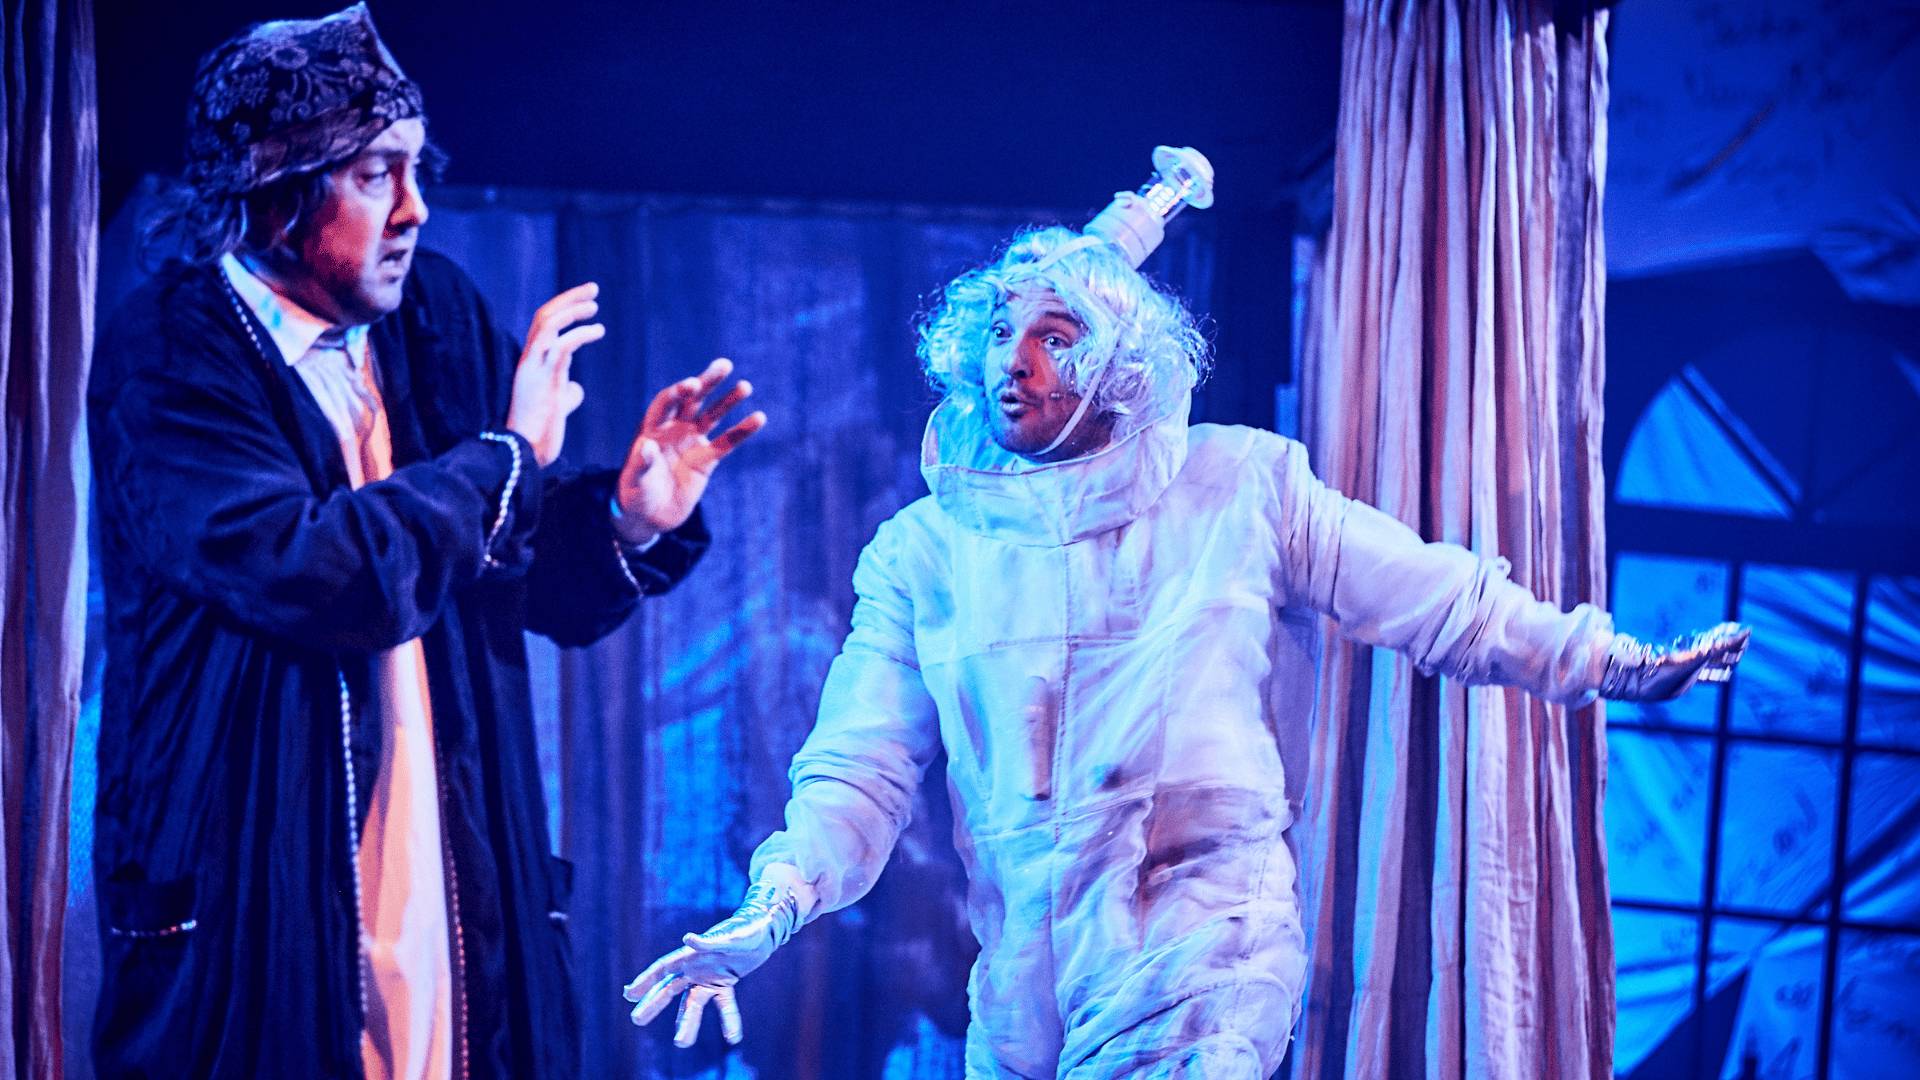 A Christmas Carol production shot: Scrooge looks scared of one of the Christmas ghosts